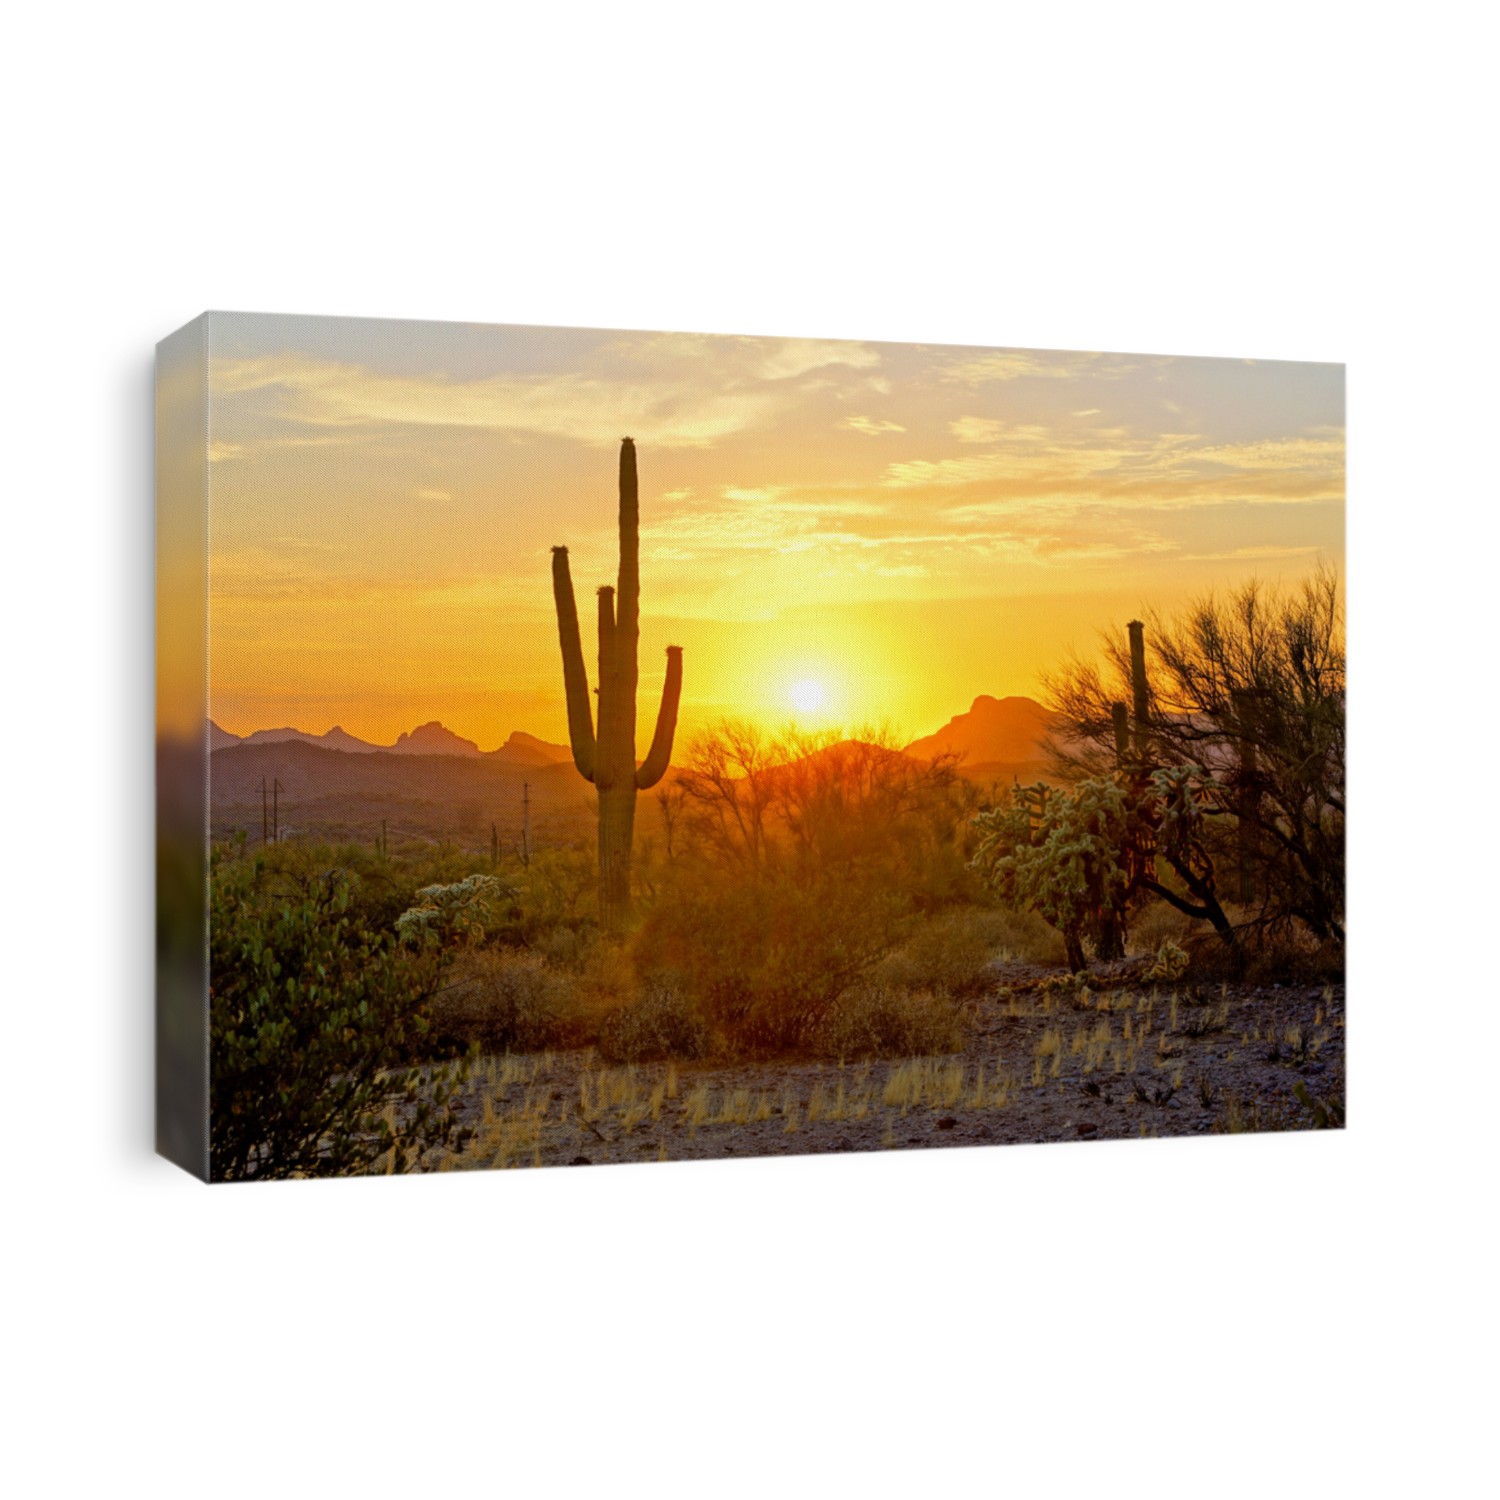 Sunset view of the Arizona desert with Saguaro cacti and mountains 